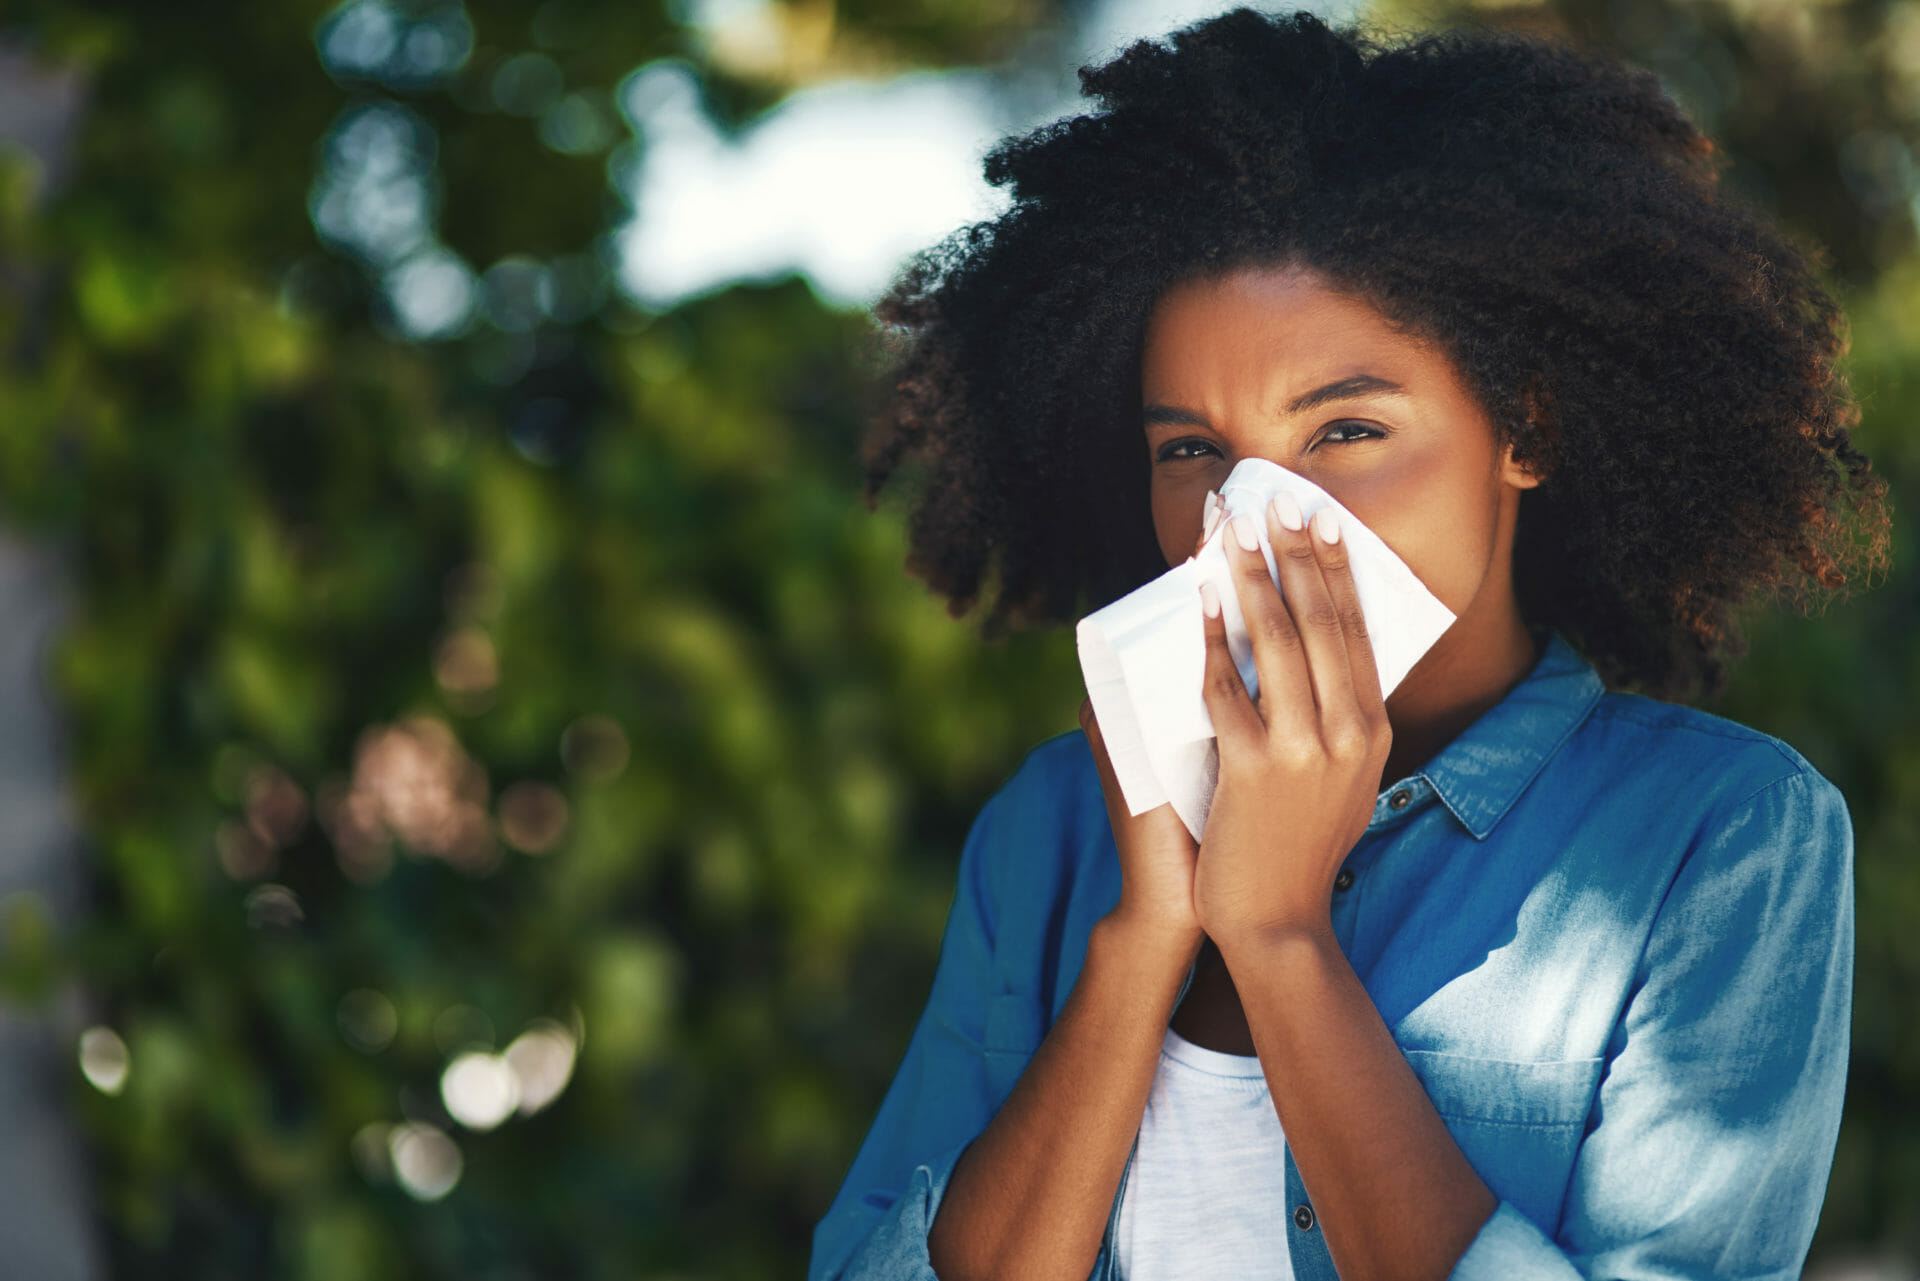 Here’s What You Need To Know About Spring Allergies